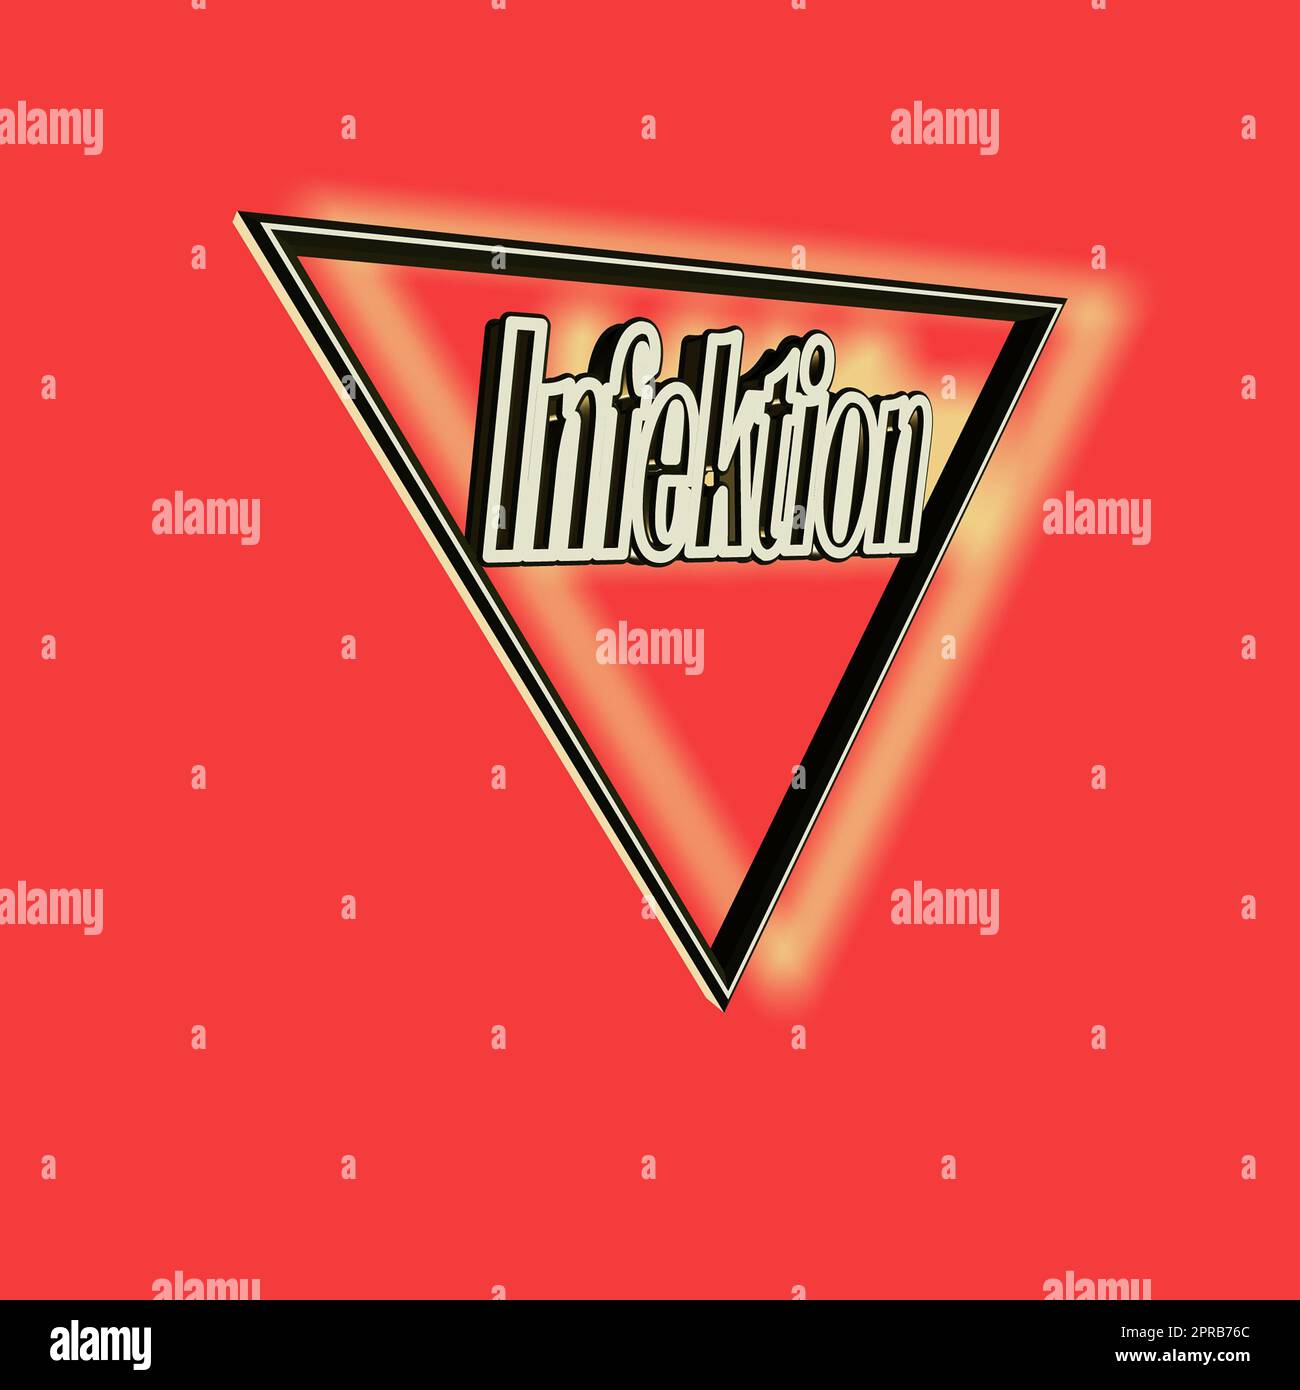 'Infektion' = 'Infection' - word, lettering or text as a 3D illustration, 3D rendering, computer graphics Stock Photo